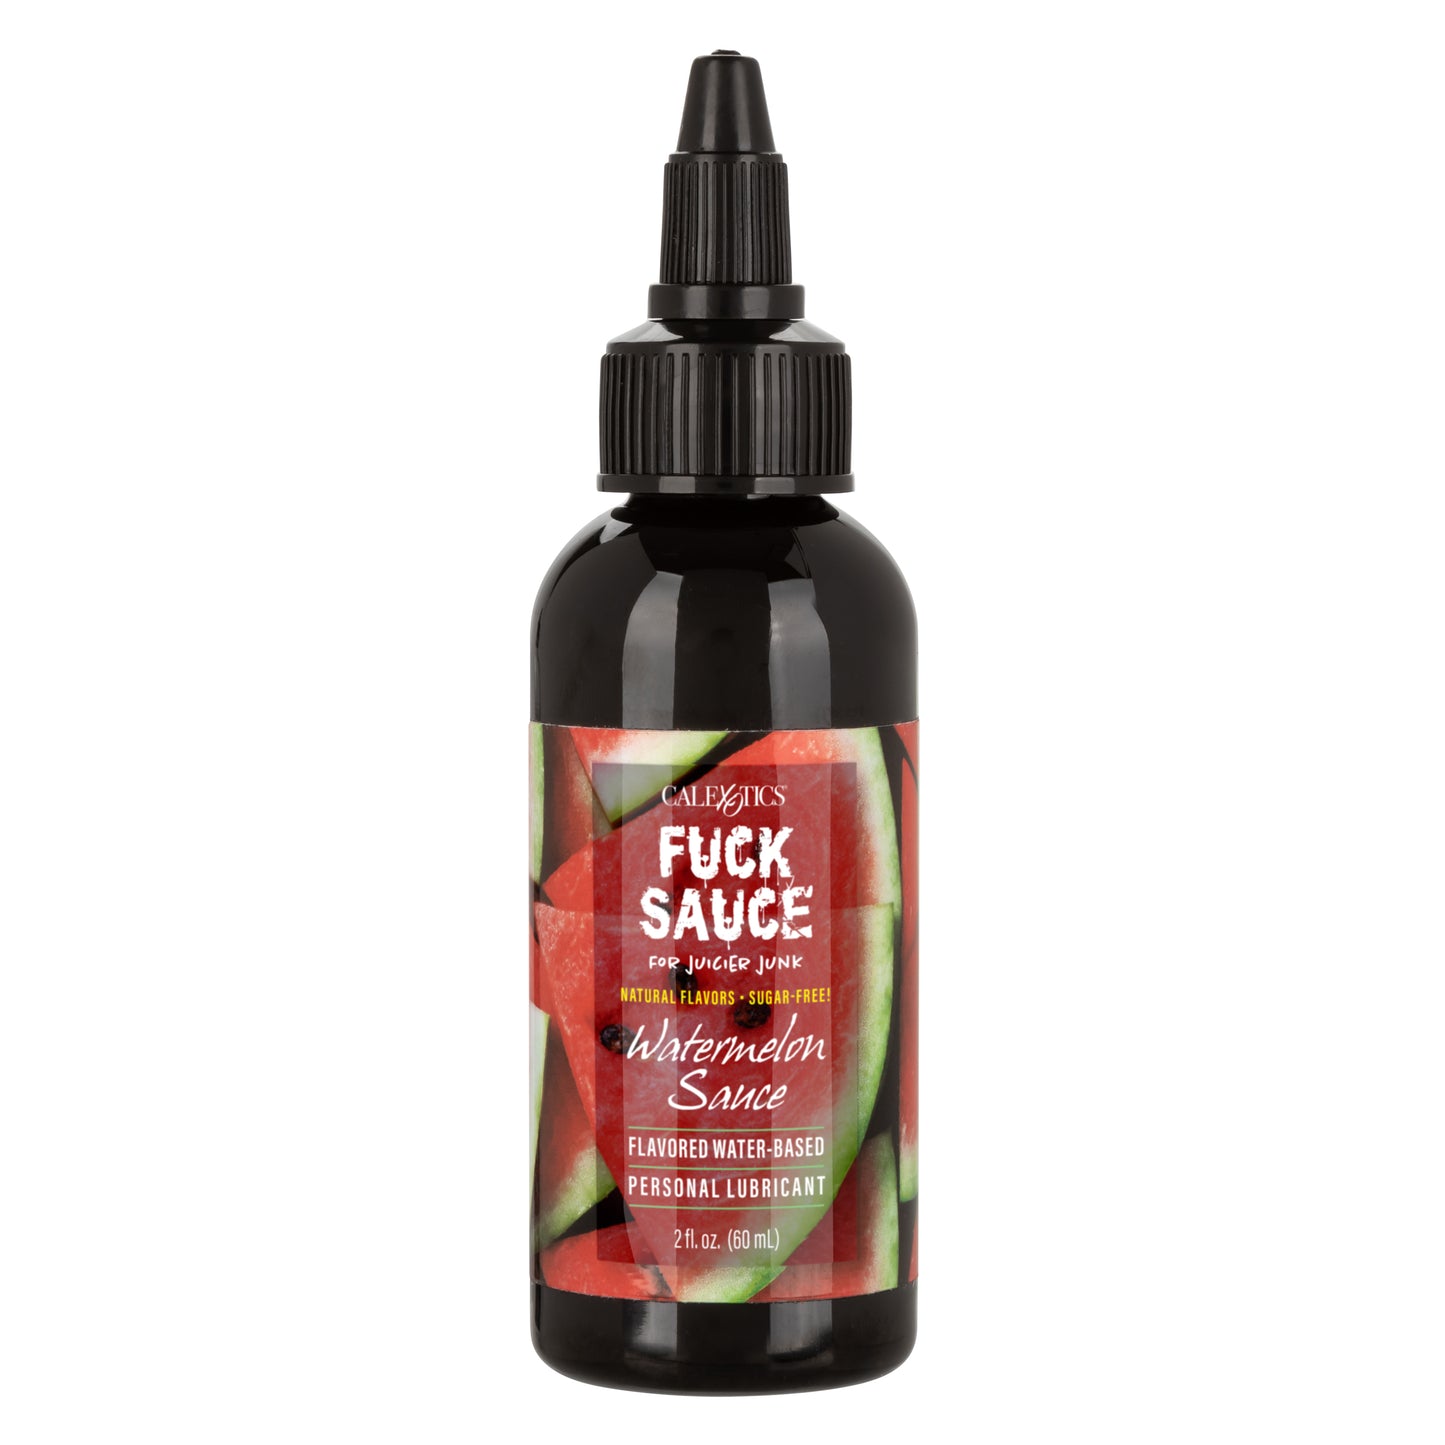 Fuck Sauce™ Flavored Water-Based Personal Lubricant - Watermelon 2 fl. oz.